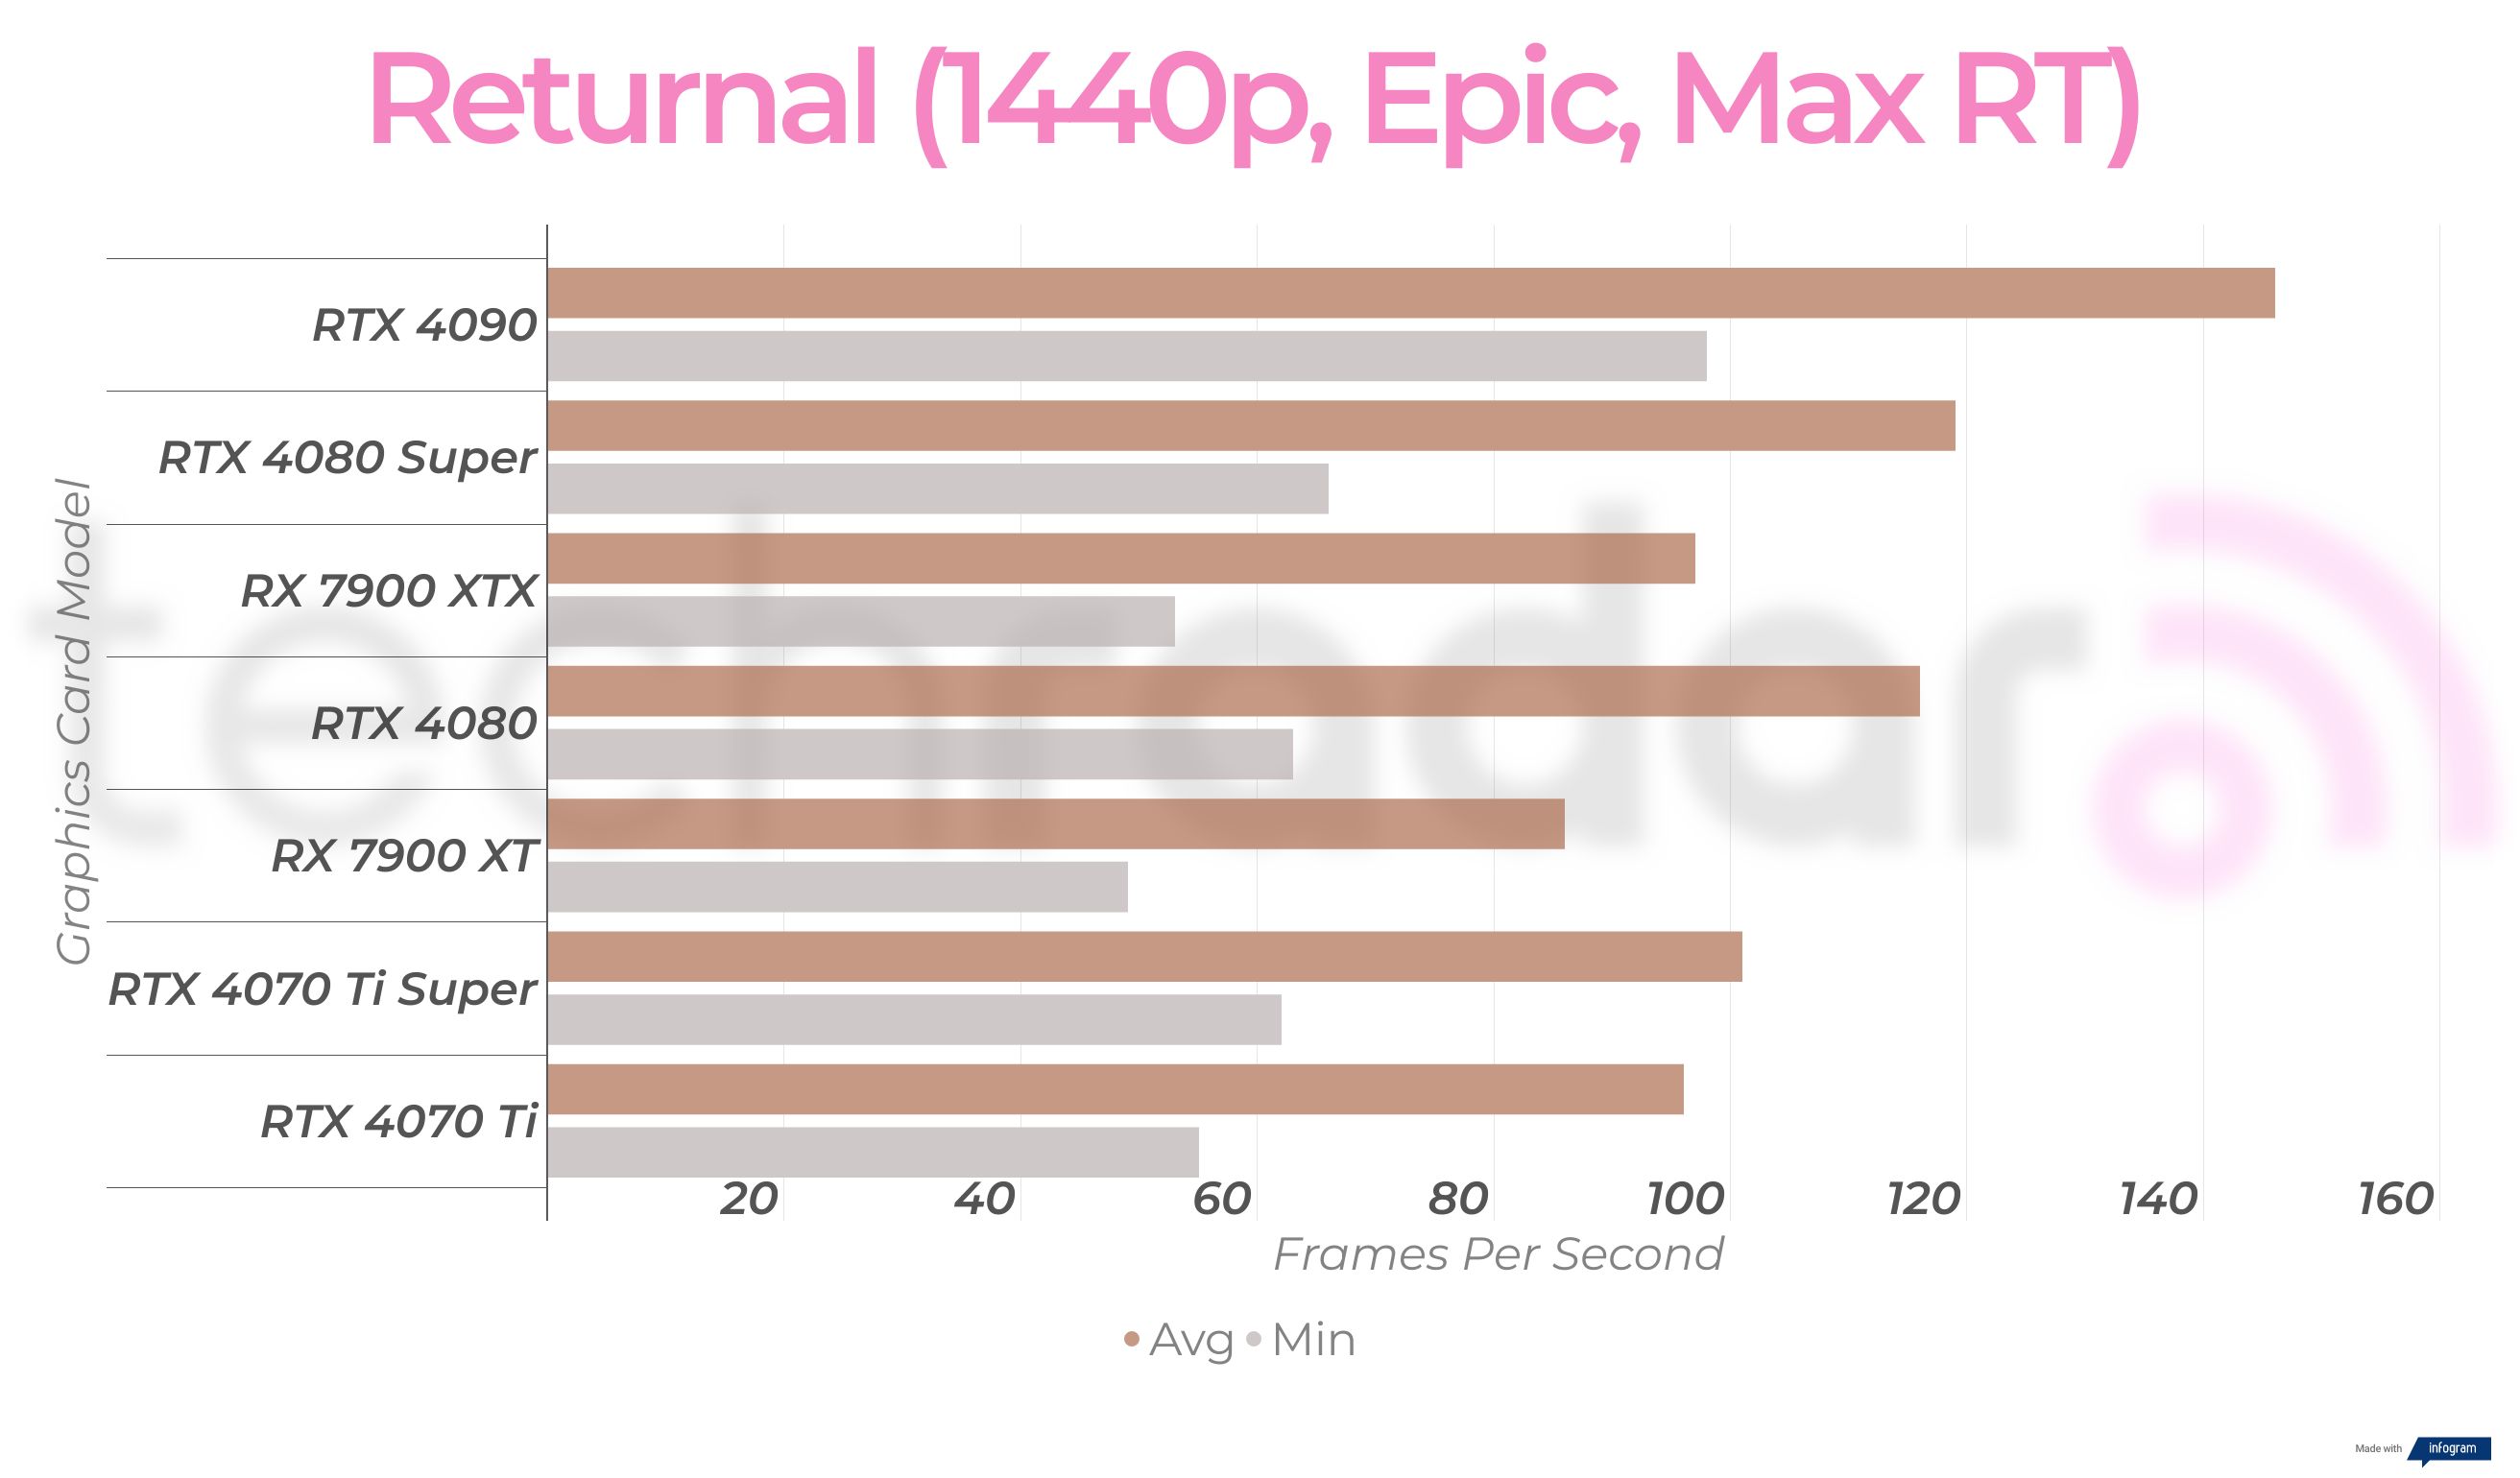 Gaming benchmark results for the Nvidia GeForce RTX 4080 Super